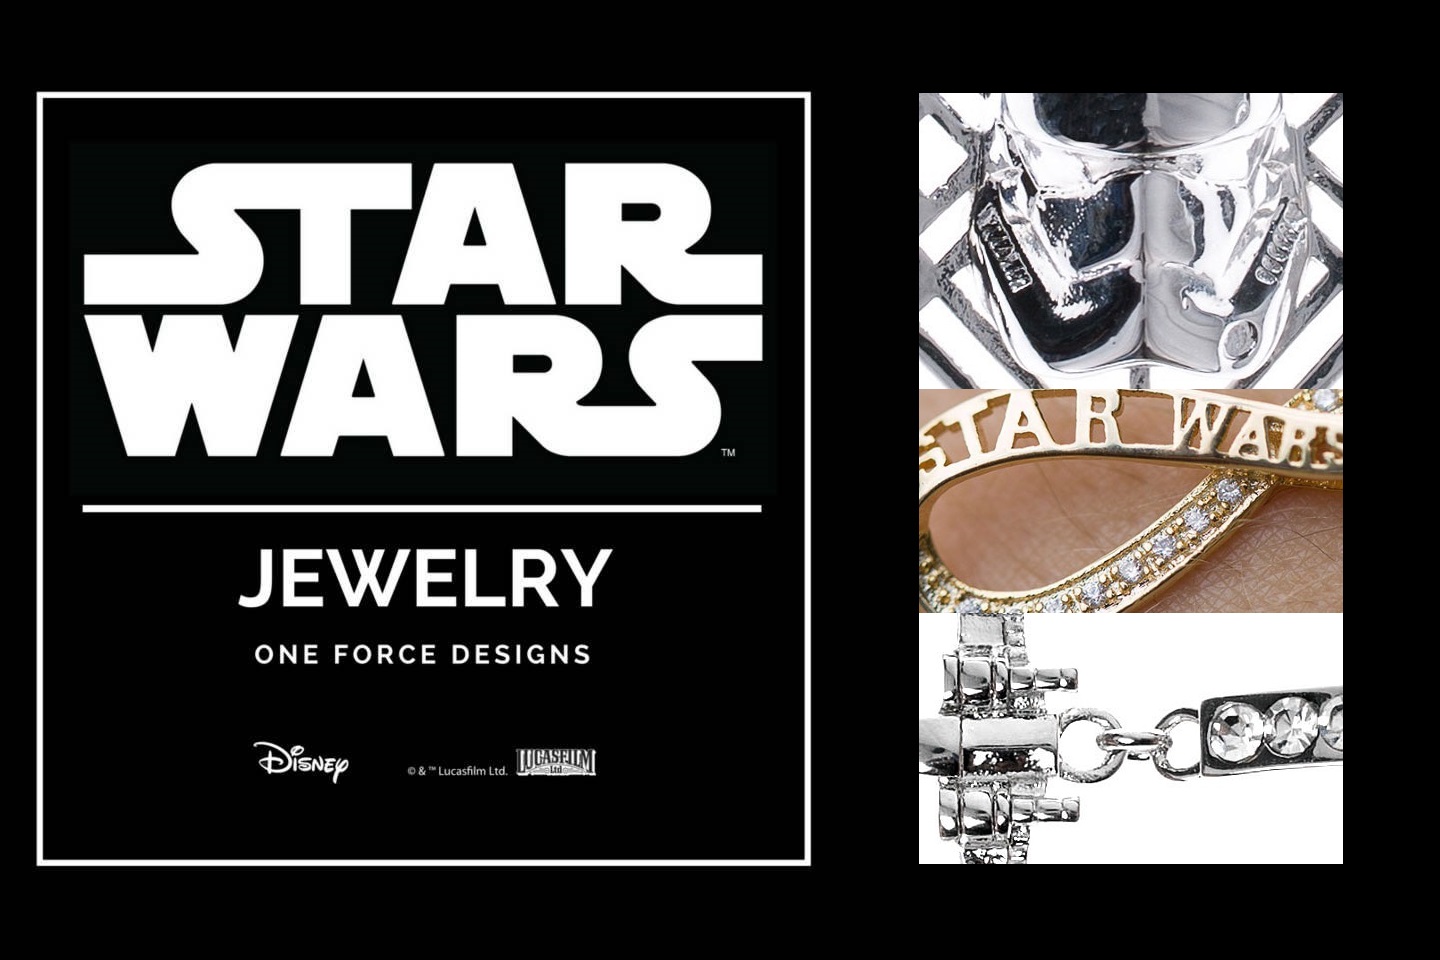 One Force Designs x Star Wars jewelry collection sneak peaks